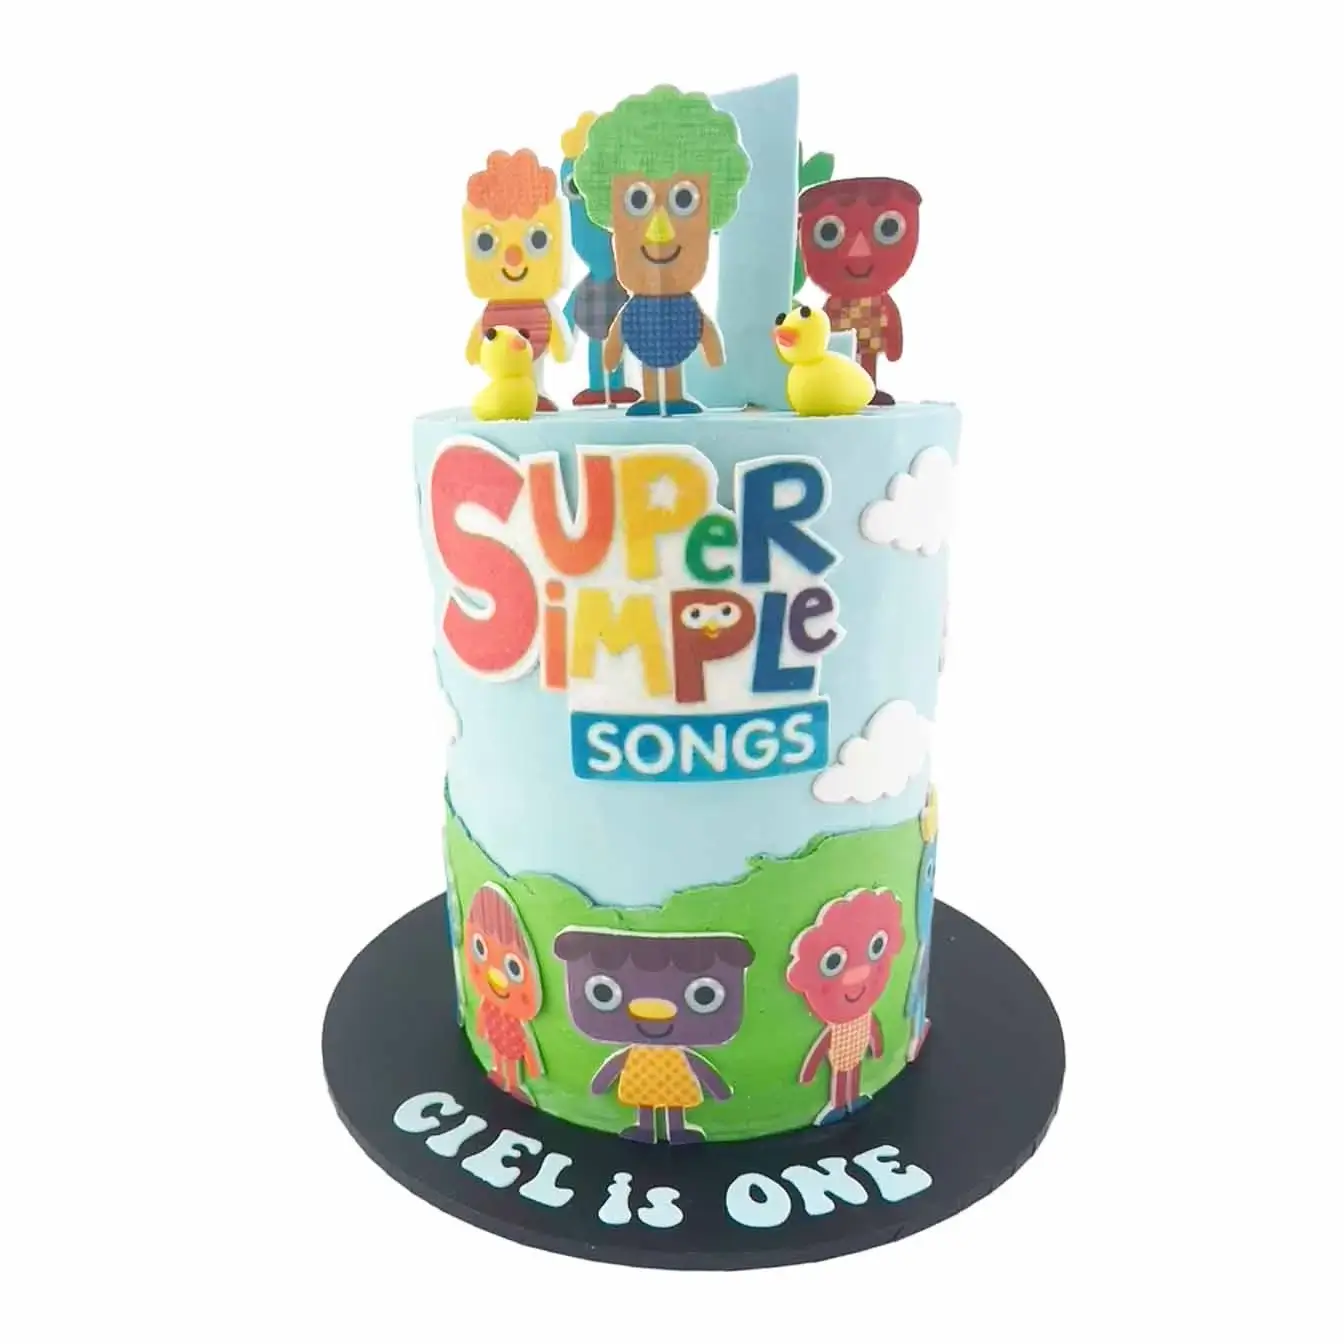 Super Simple Songs Celebration Cake - A joyful blue background with green hills, adorned with beloved characters, a delightful centerpiece for birthdays and children's celebrations.